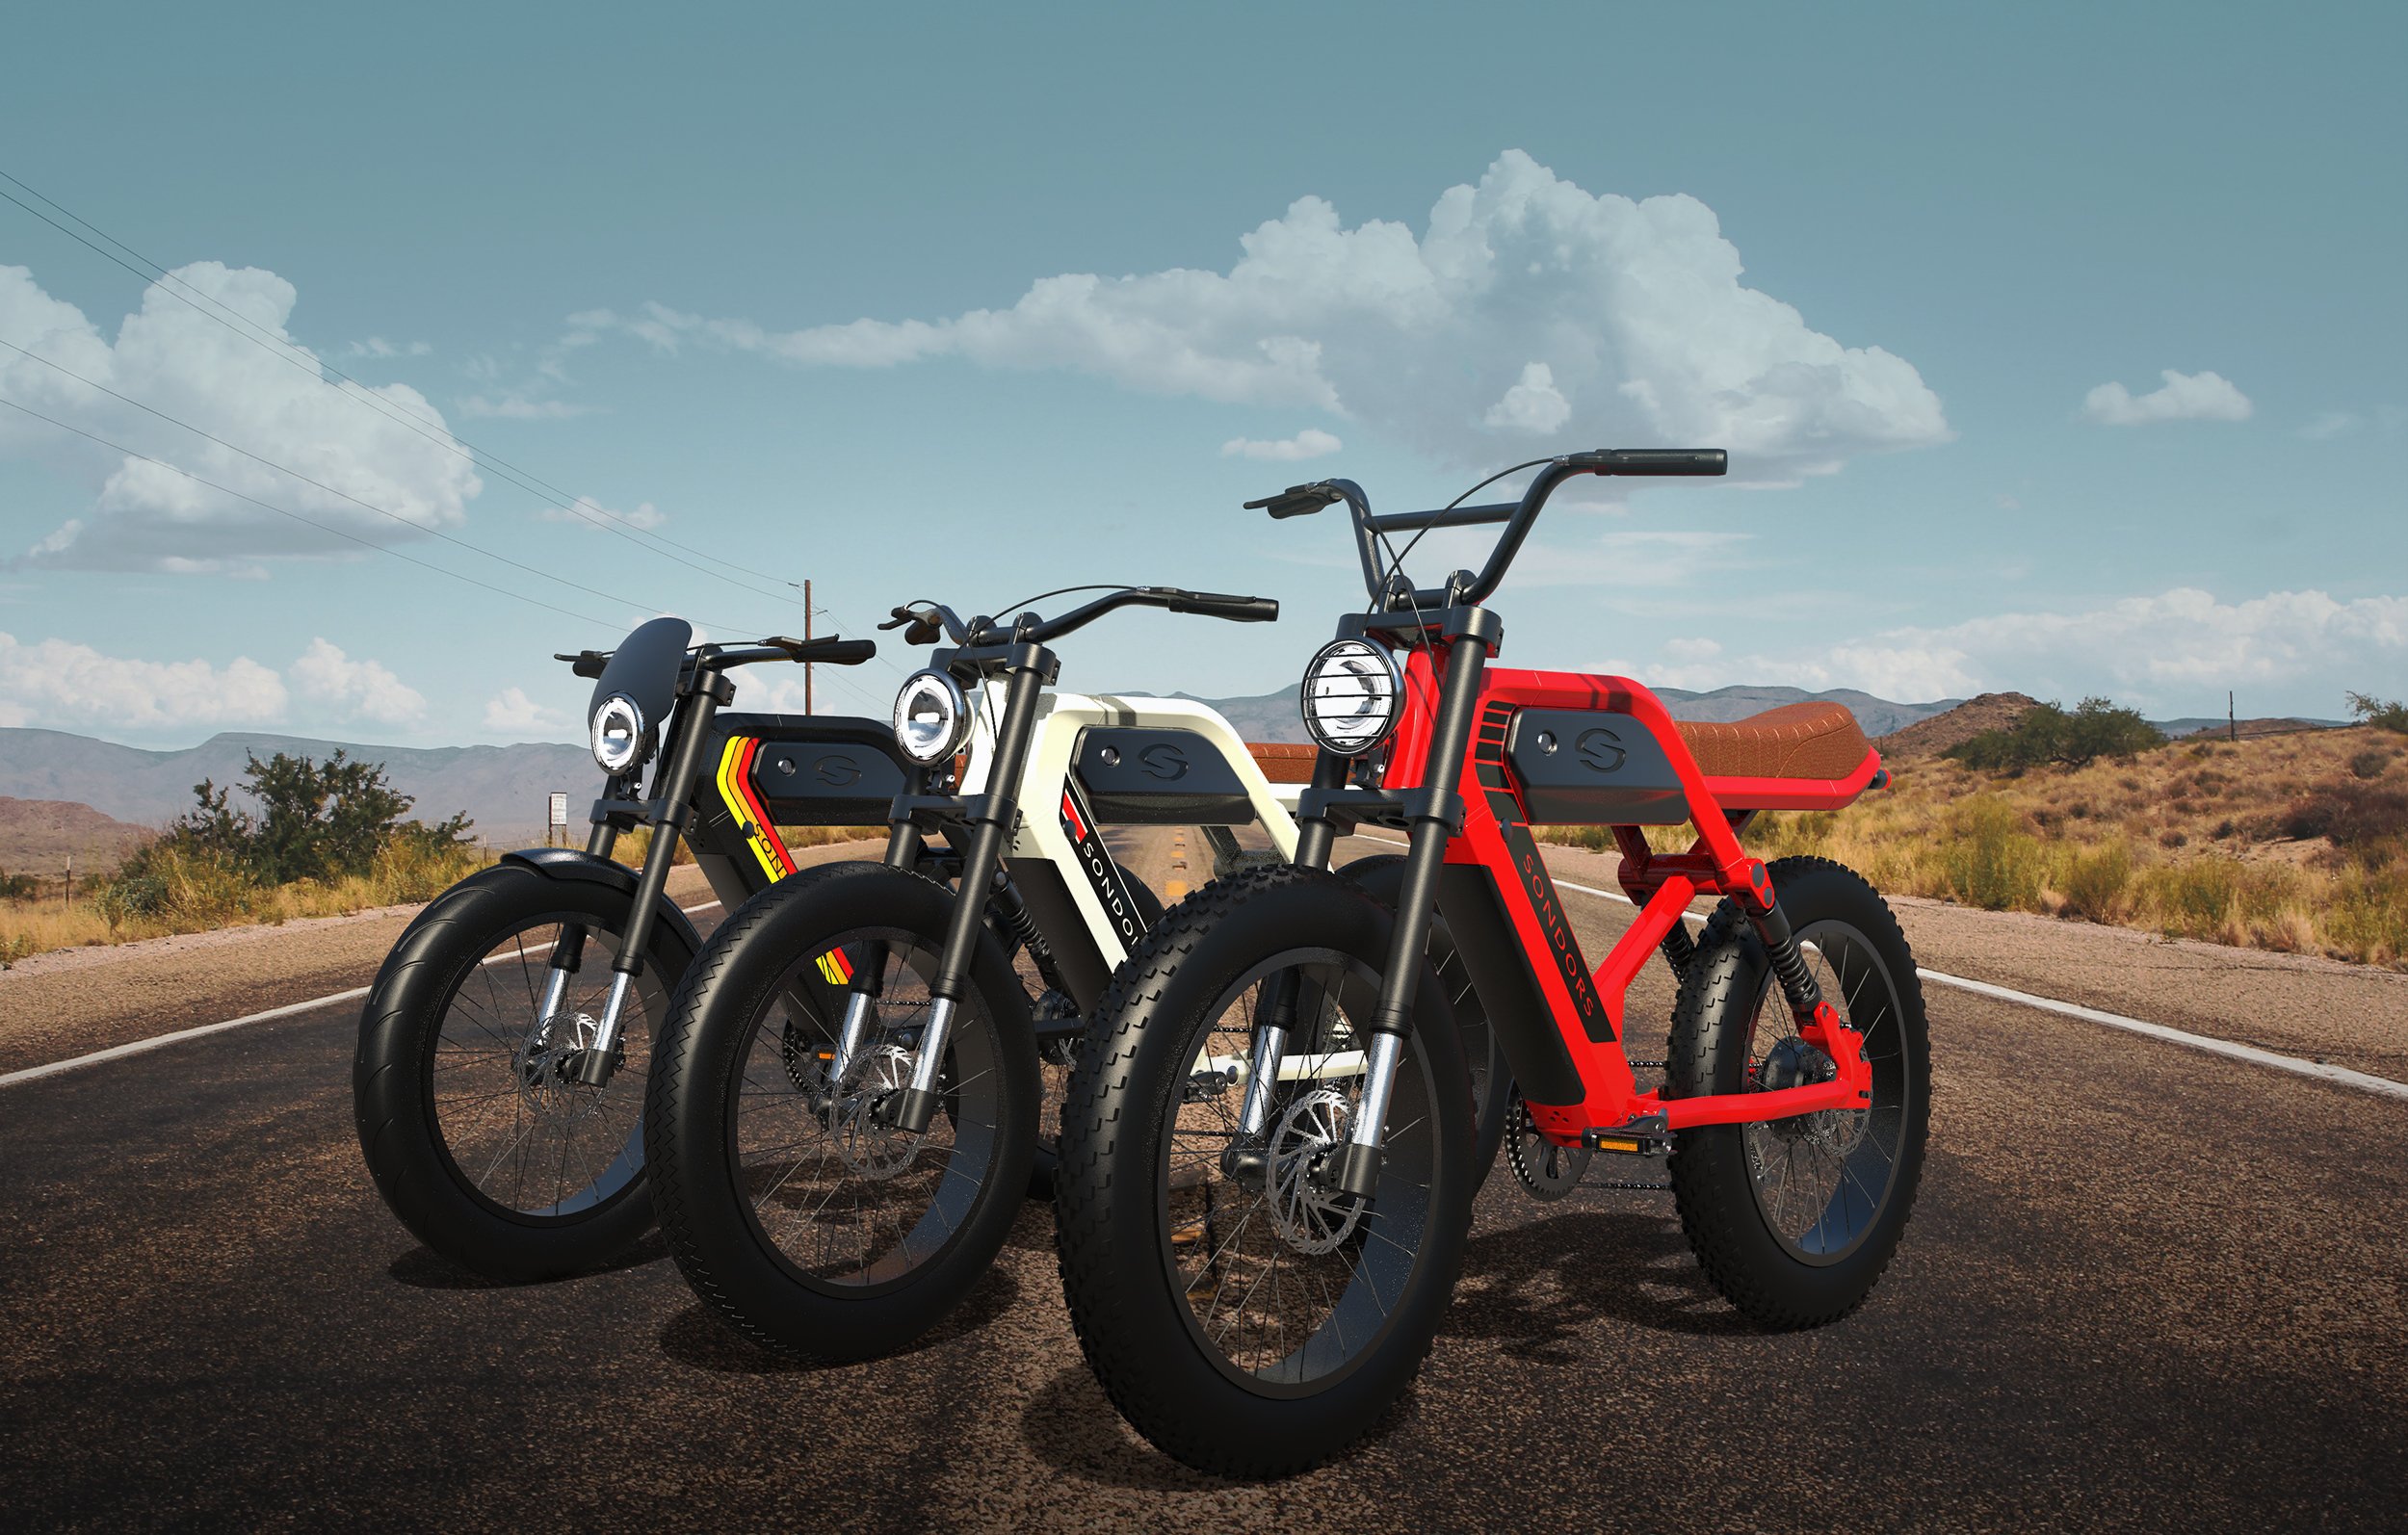 SONDORS MadMods unveiled long-range and low-cost electric mopeds - Blog - 4